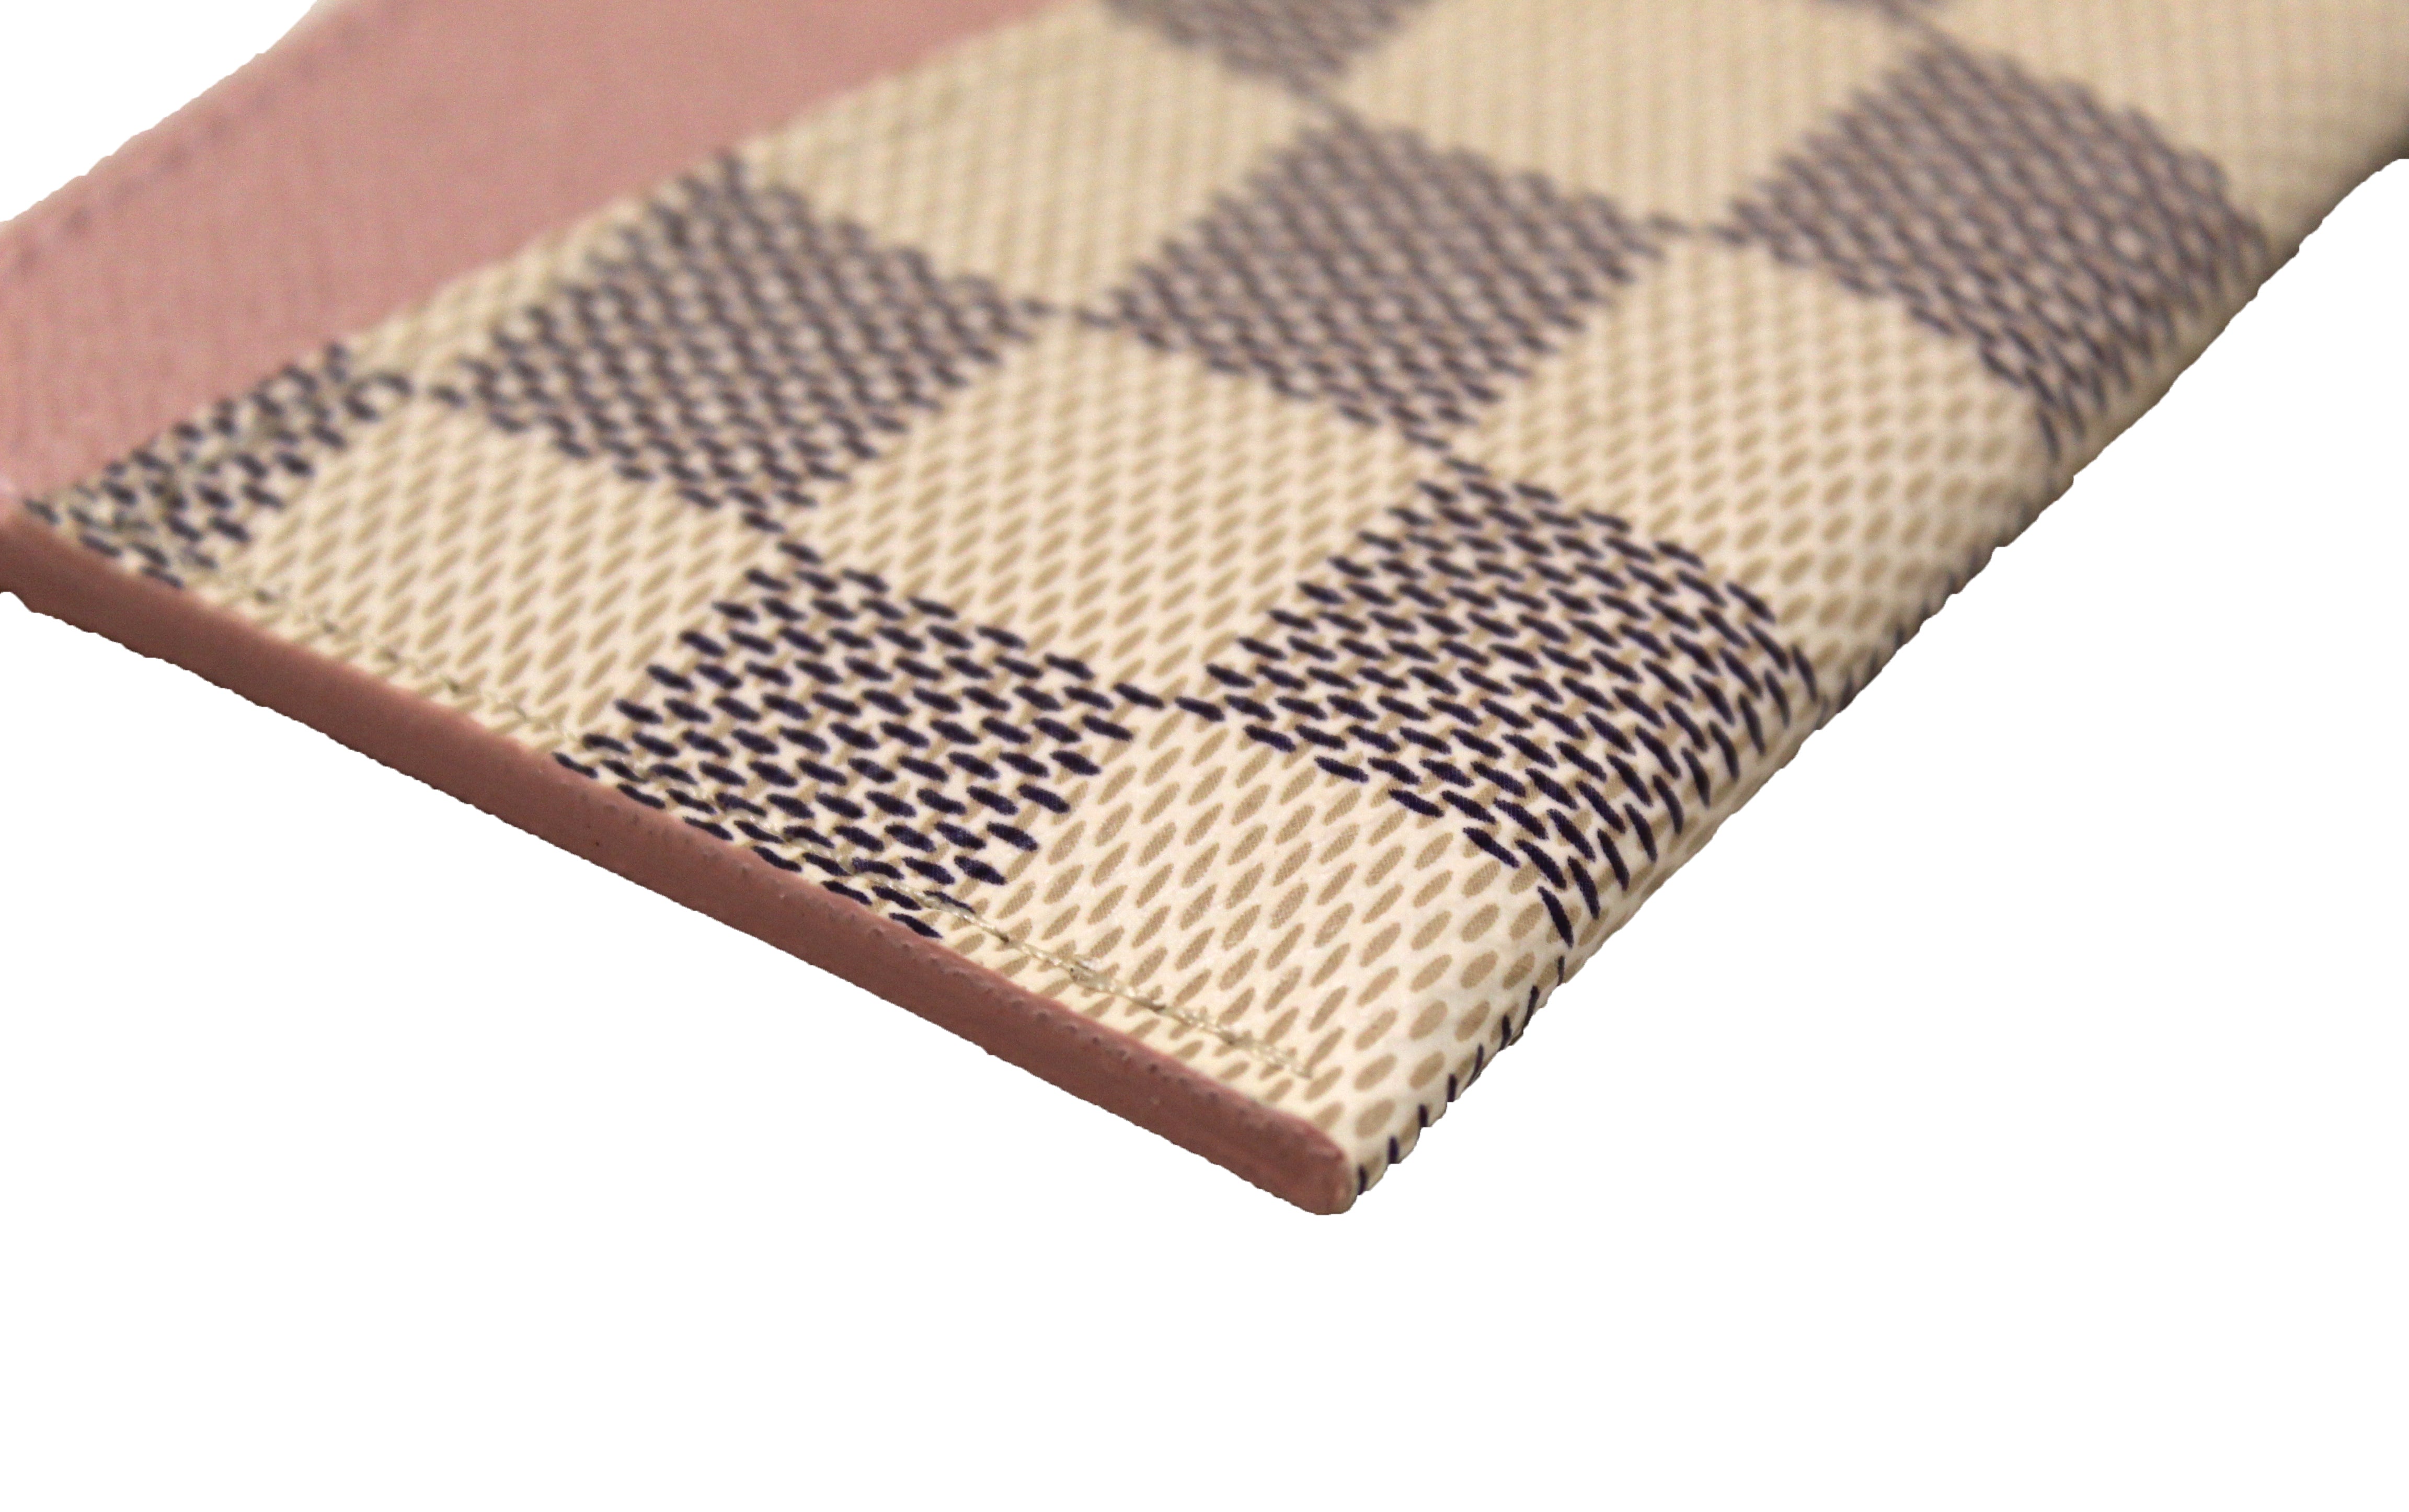 Authentic NEW Louis Vuitton Damier Azur with Light Pink Leather Cardholder